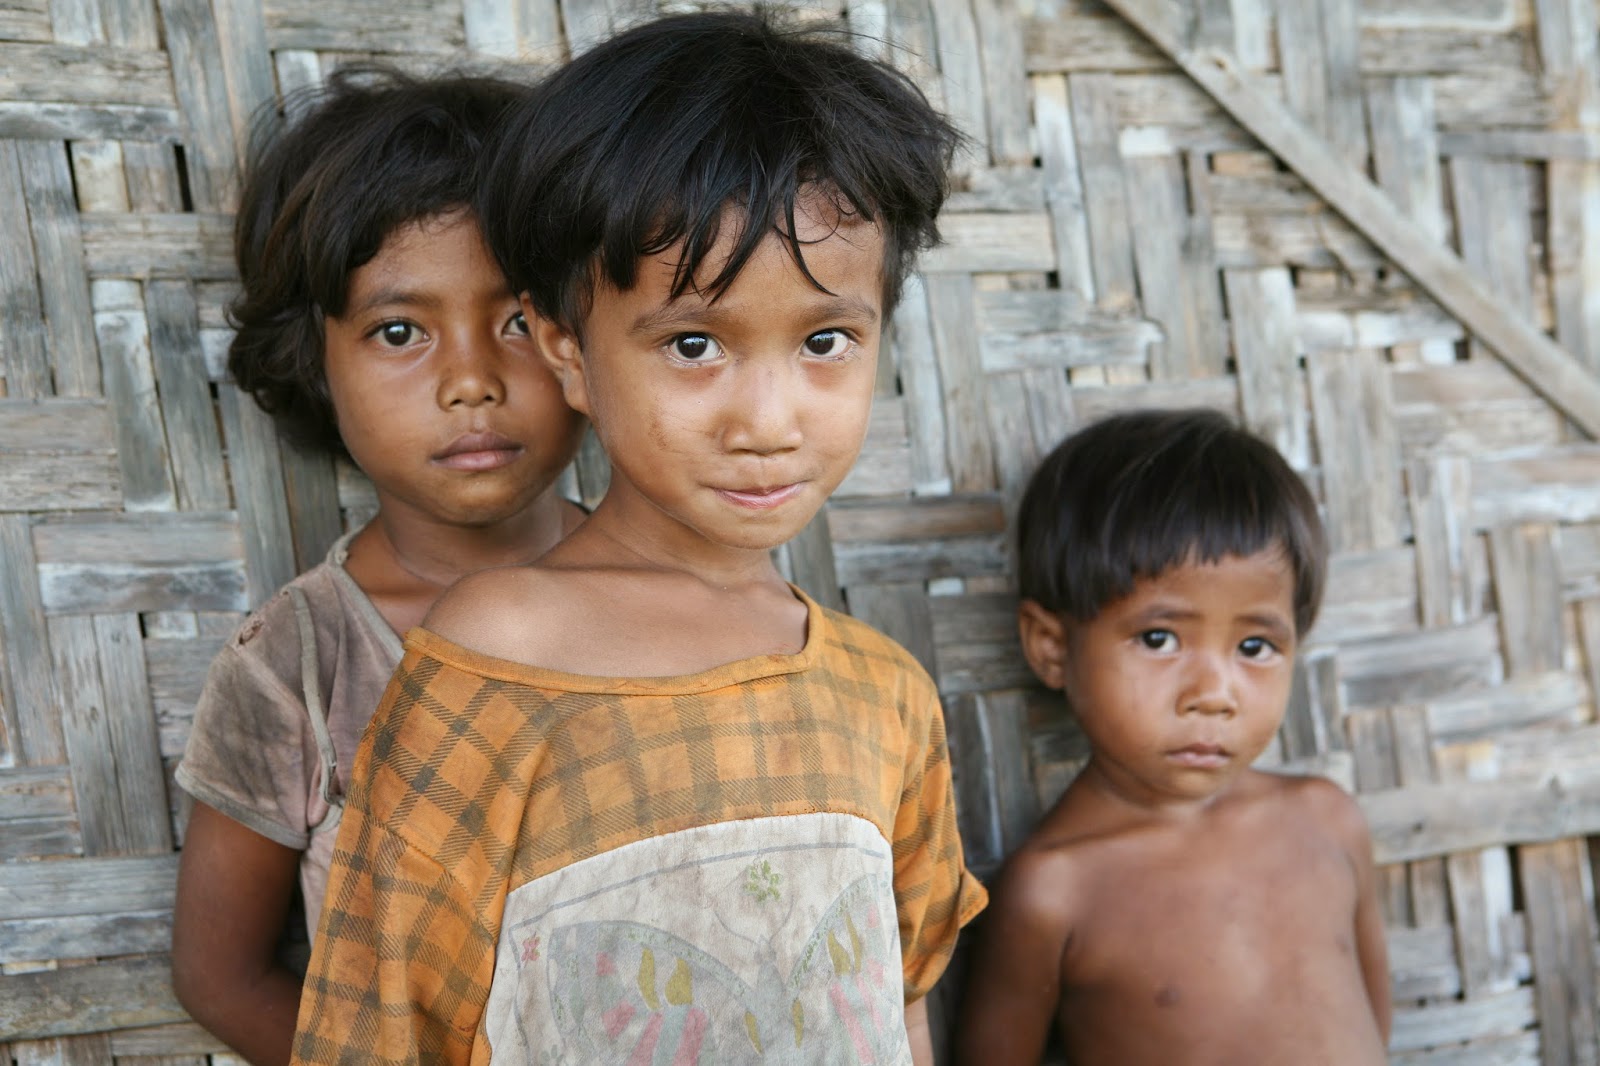 UNICEF Indonesia: Prosperity rests on stronger efforts to reduce